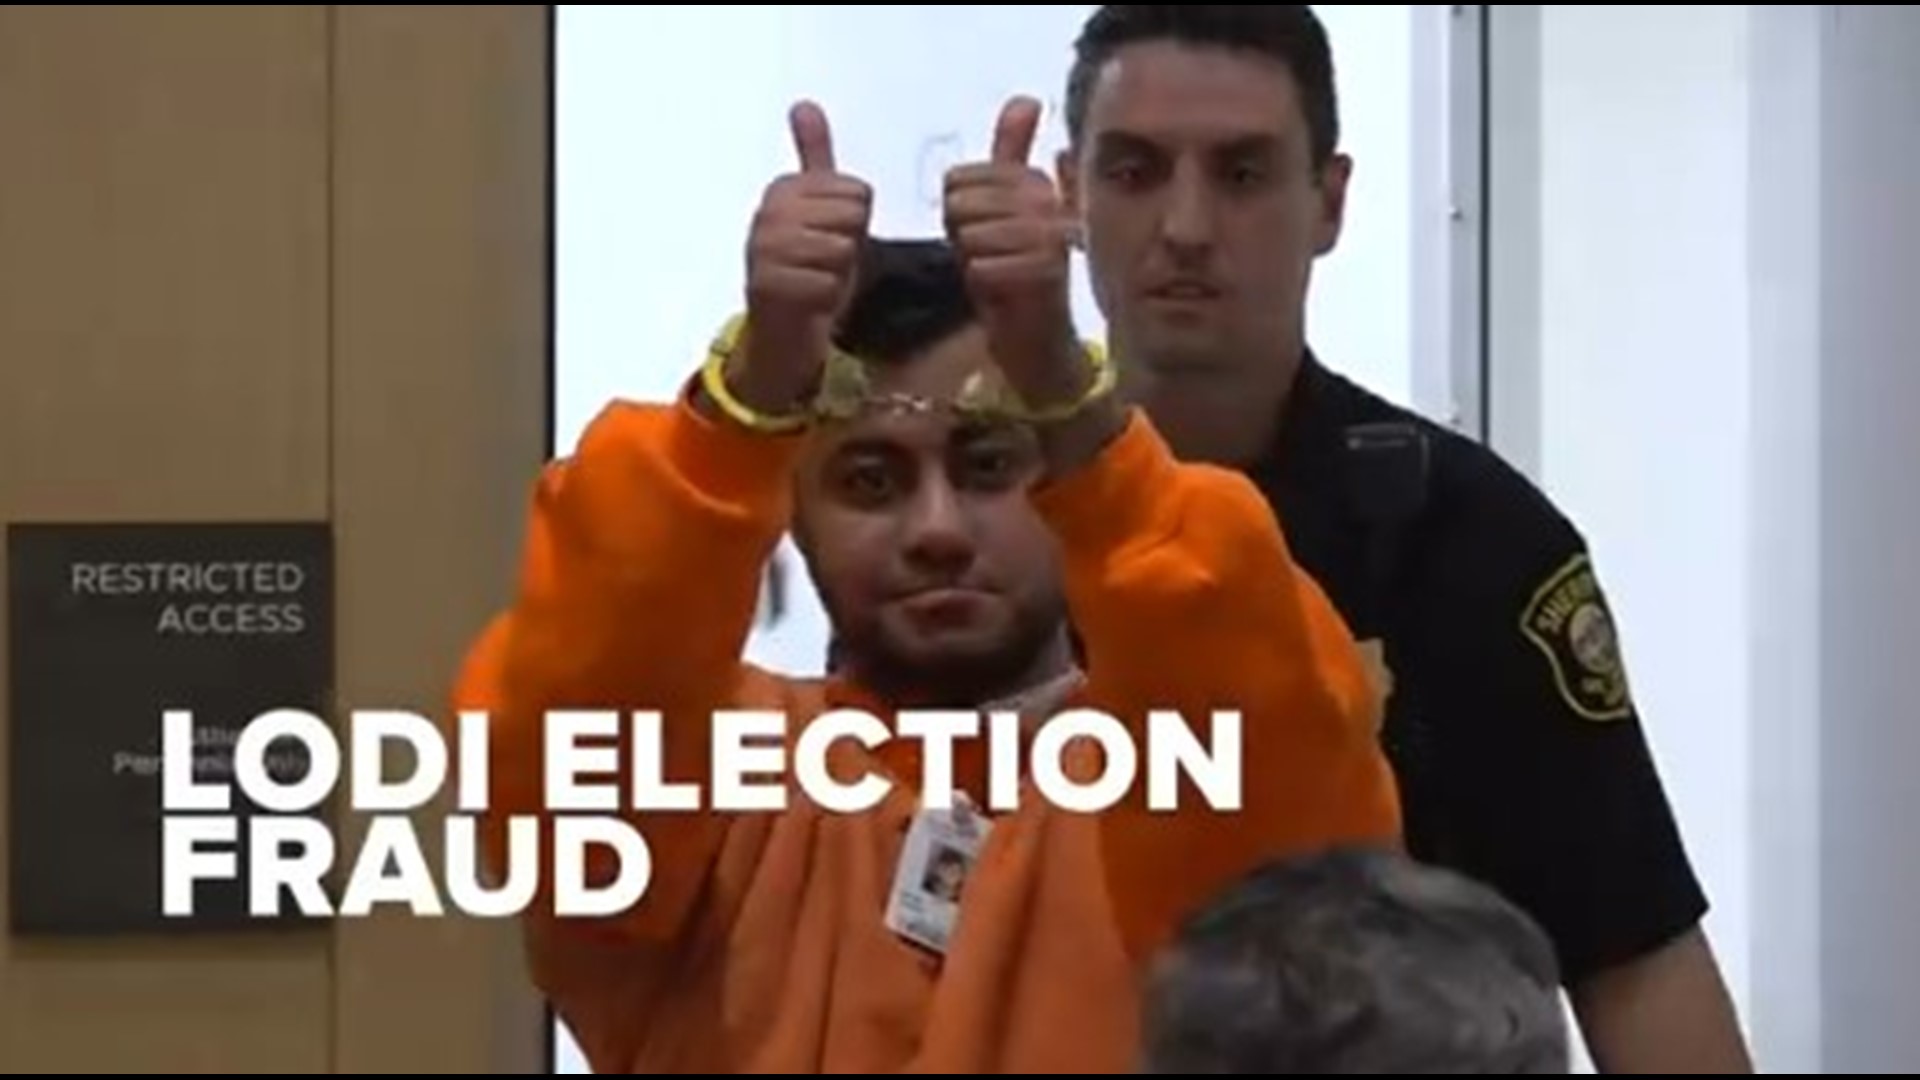 The San Joaquin County District Attorney's Office are charging Lodi City Councilmember Shakir Khan with felony charges including voter fraud.